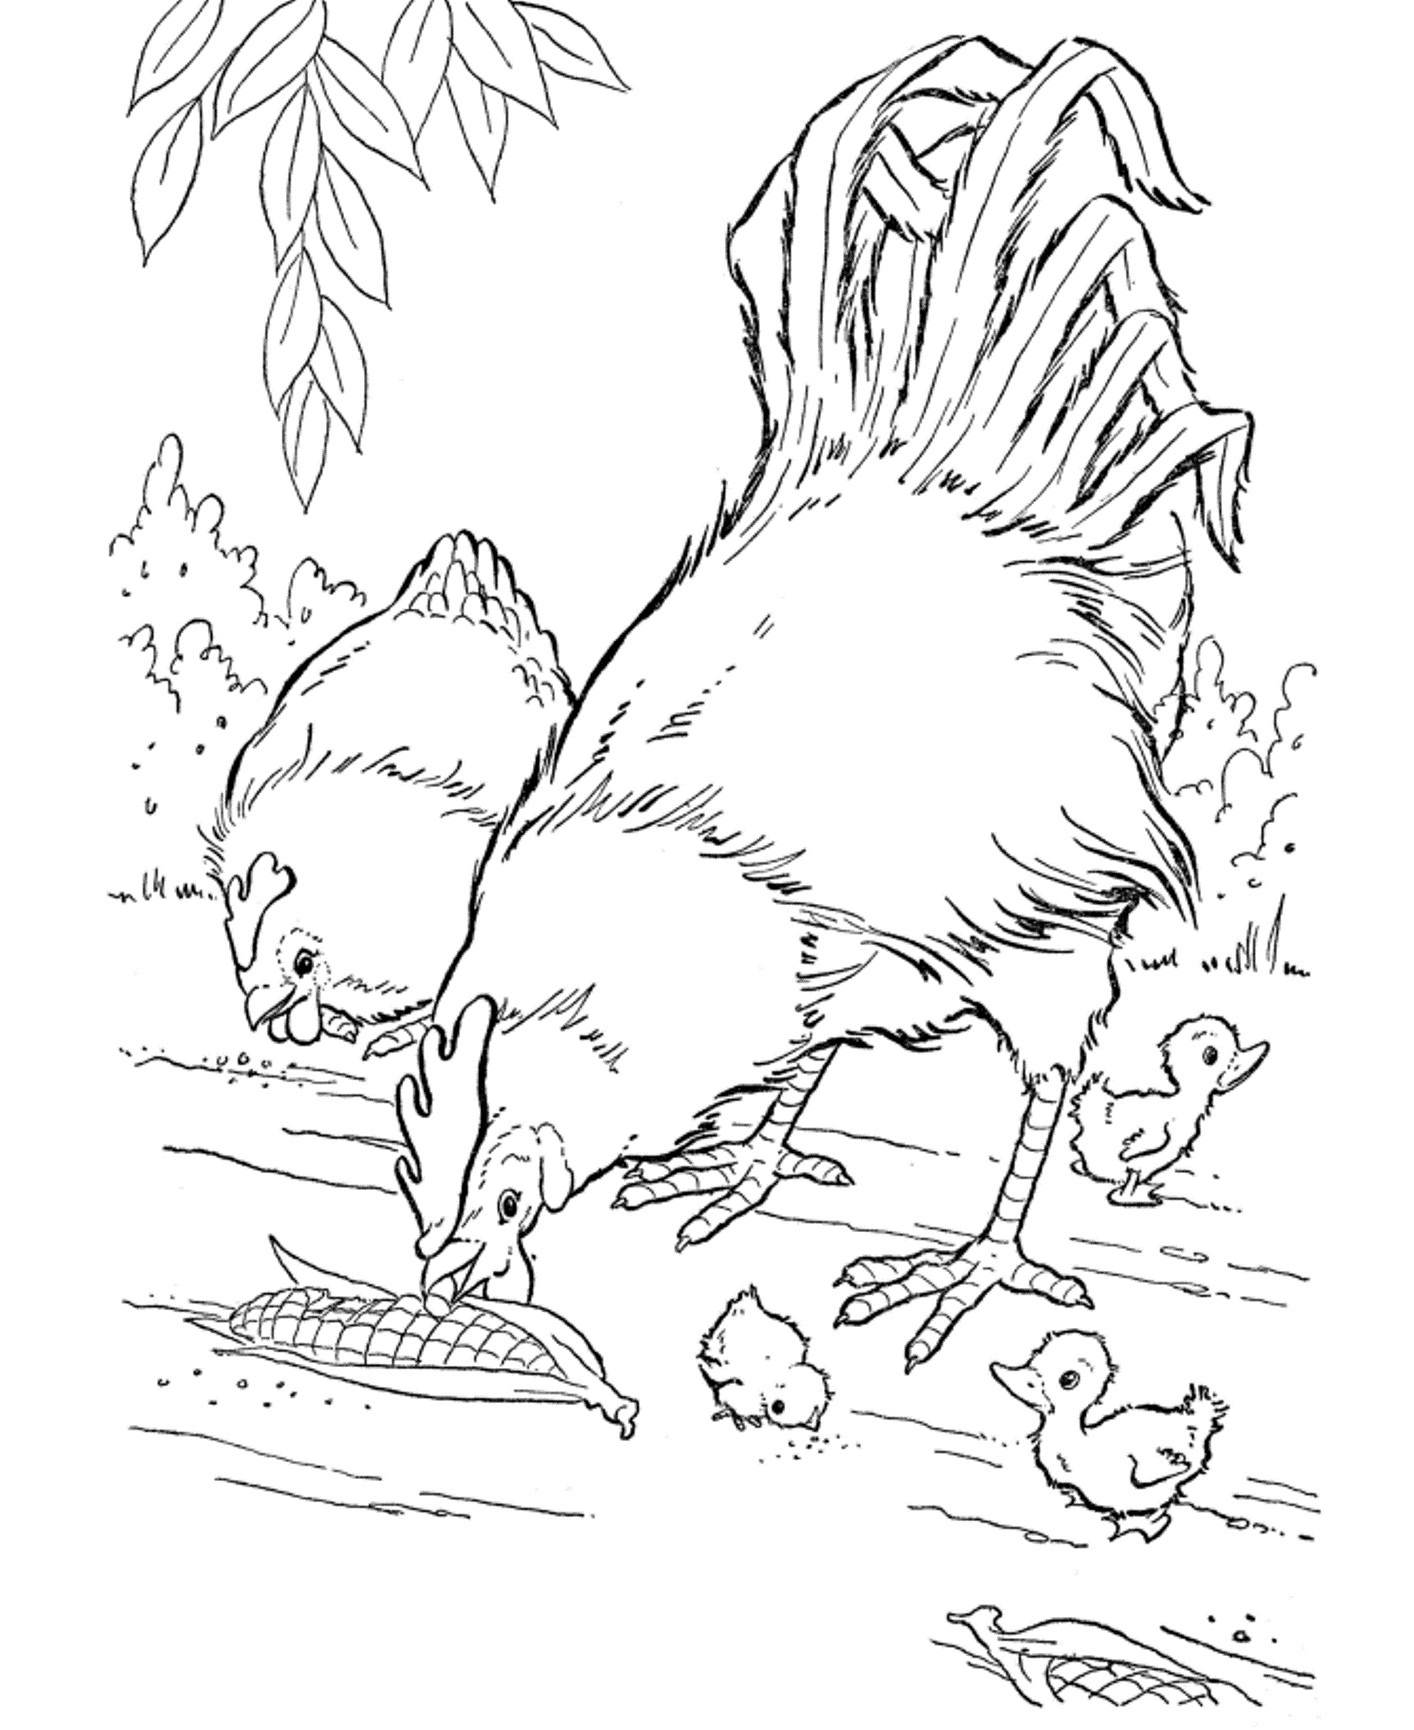 Printable Farm Animal Coloring Pages